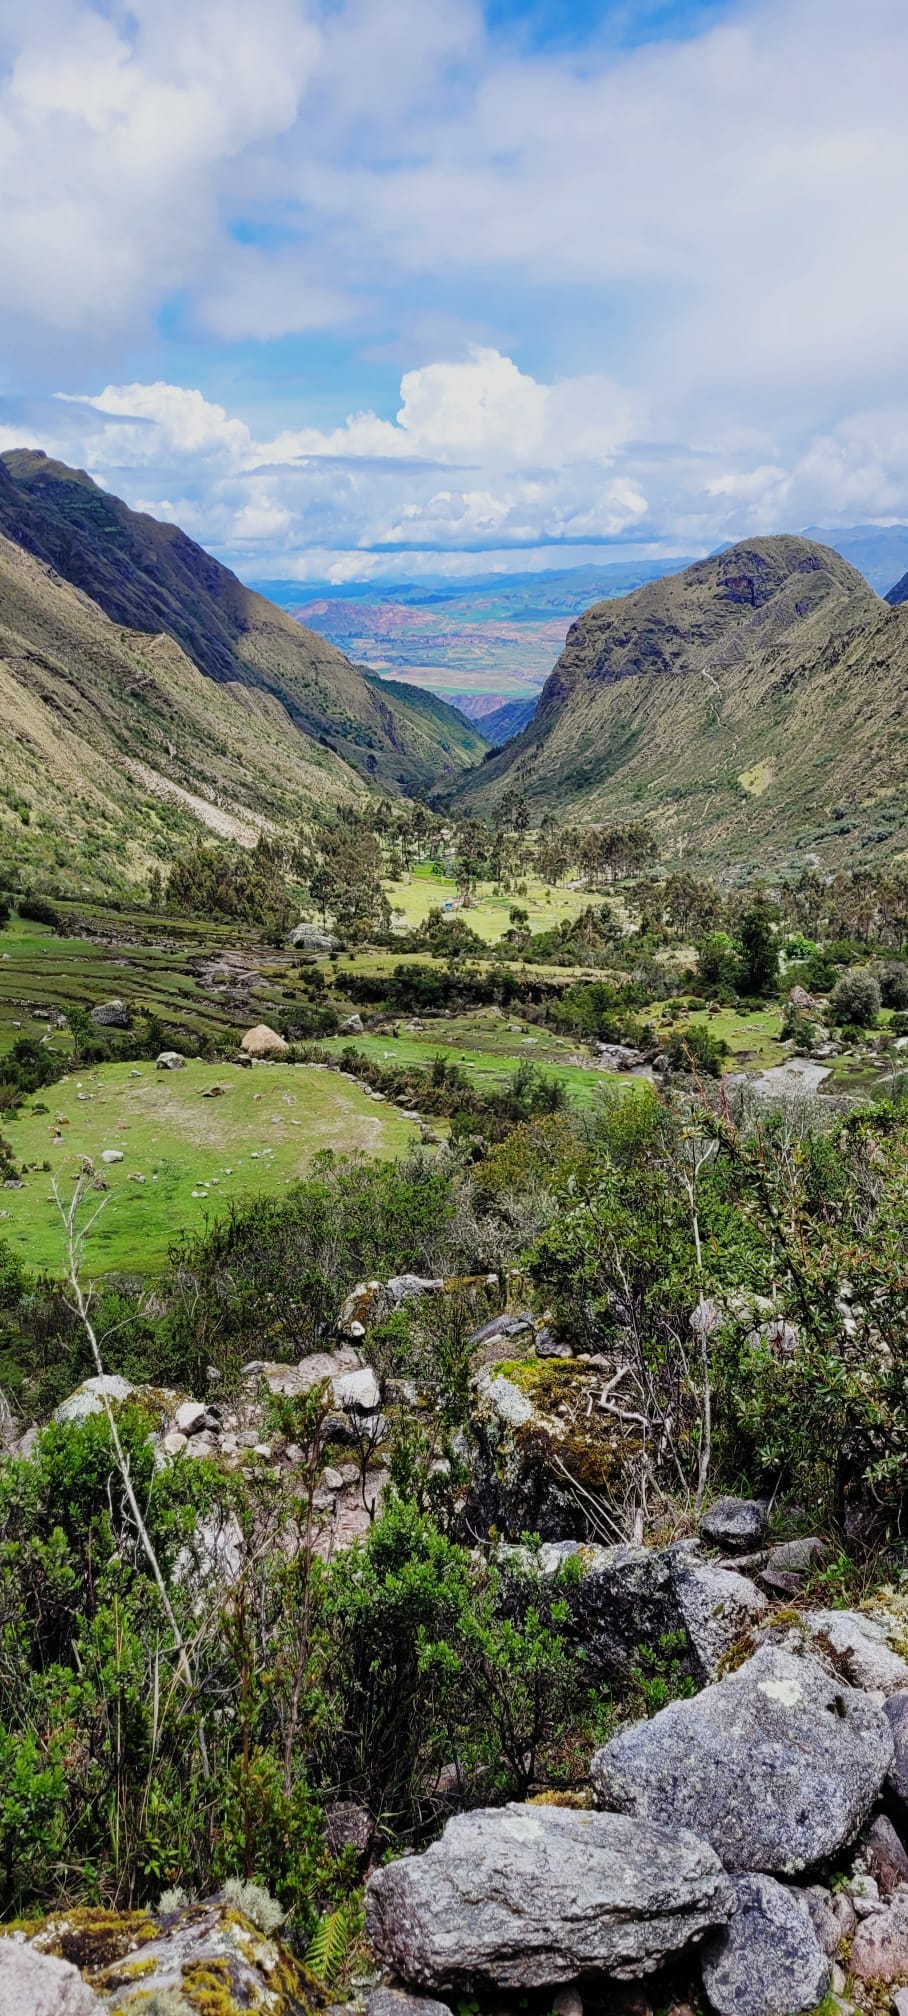 A marvellous view of the Pumahuanca valley and the sacred valley 